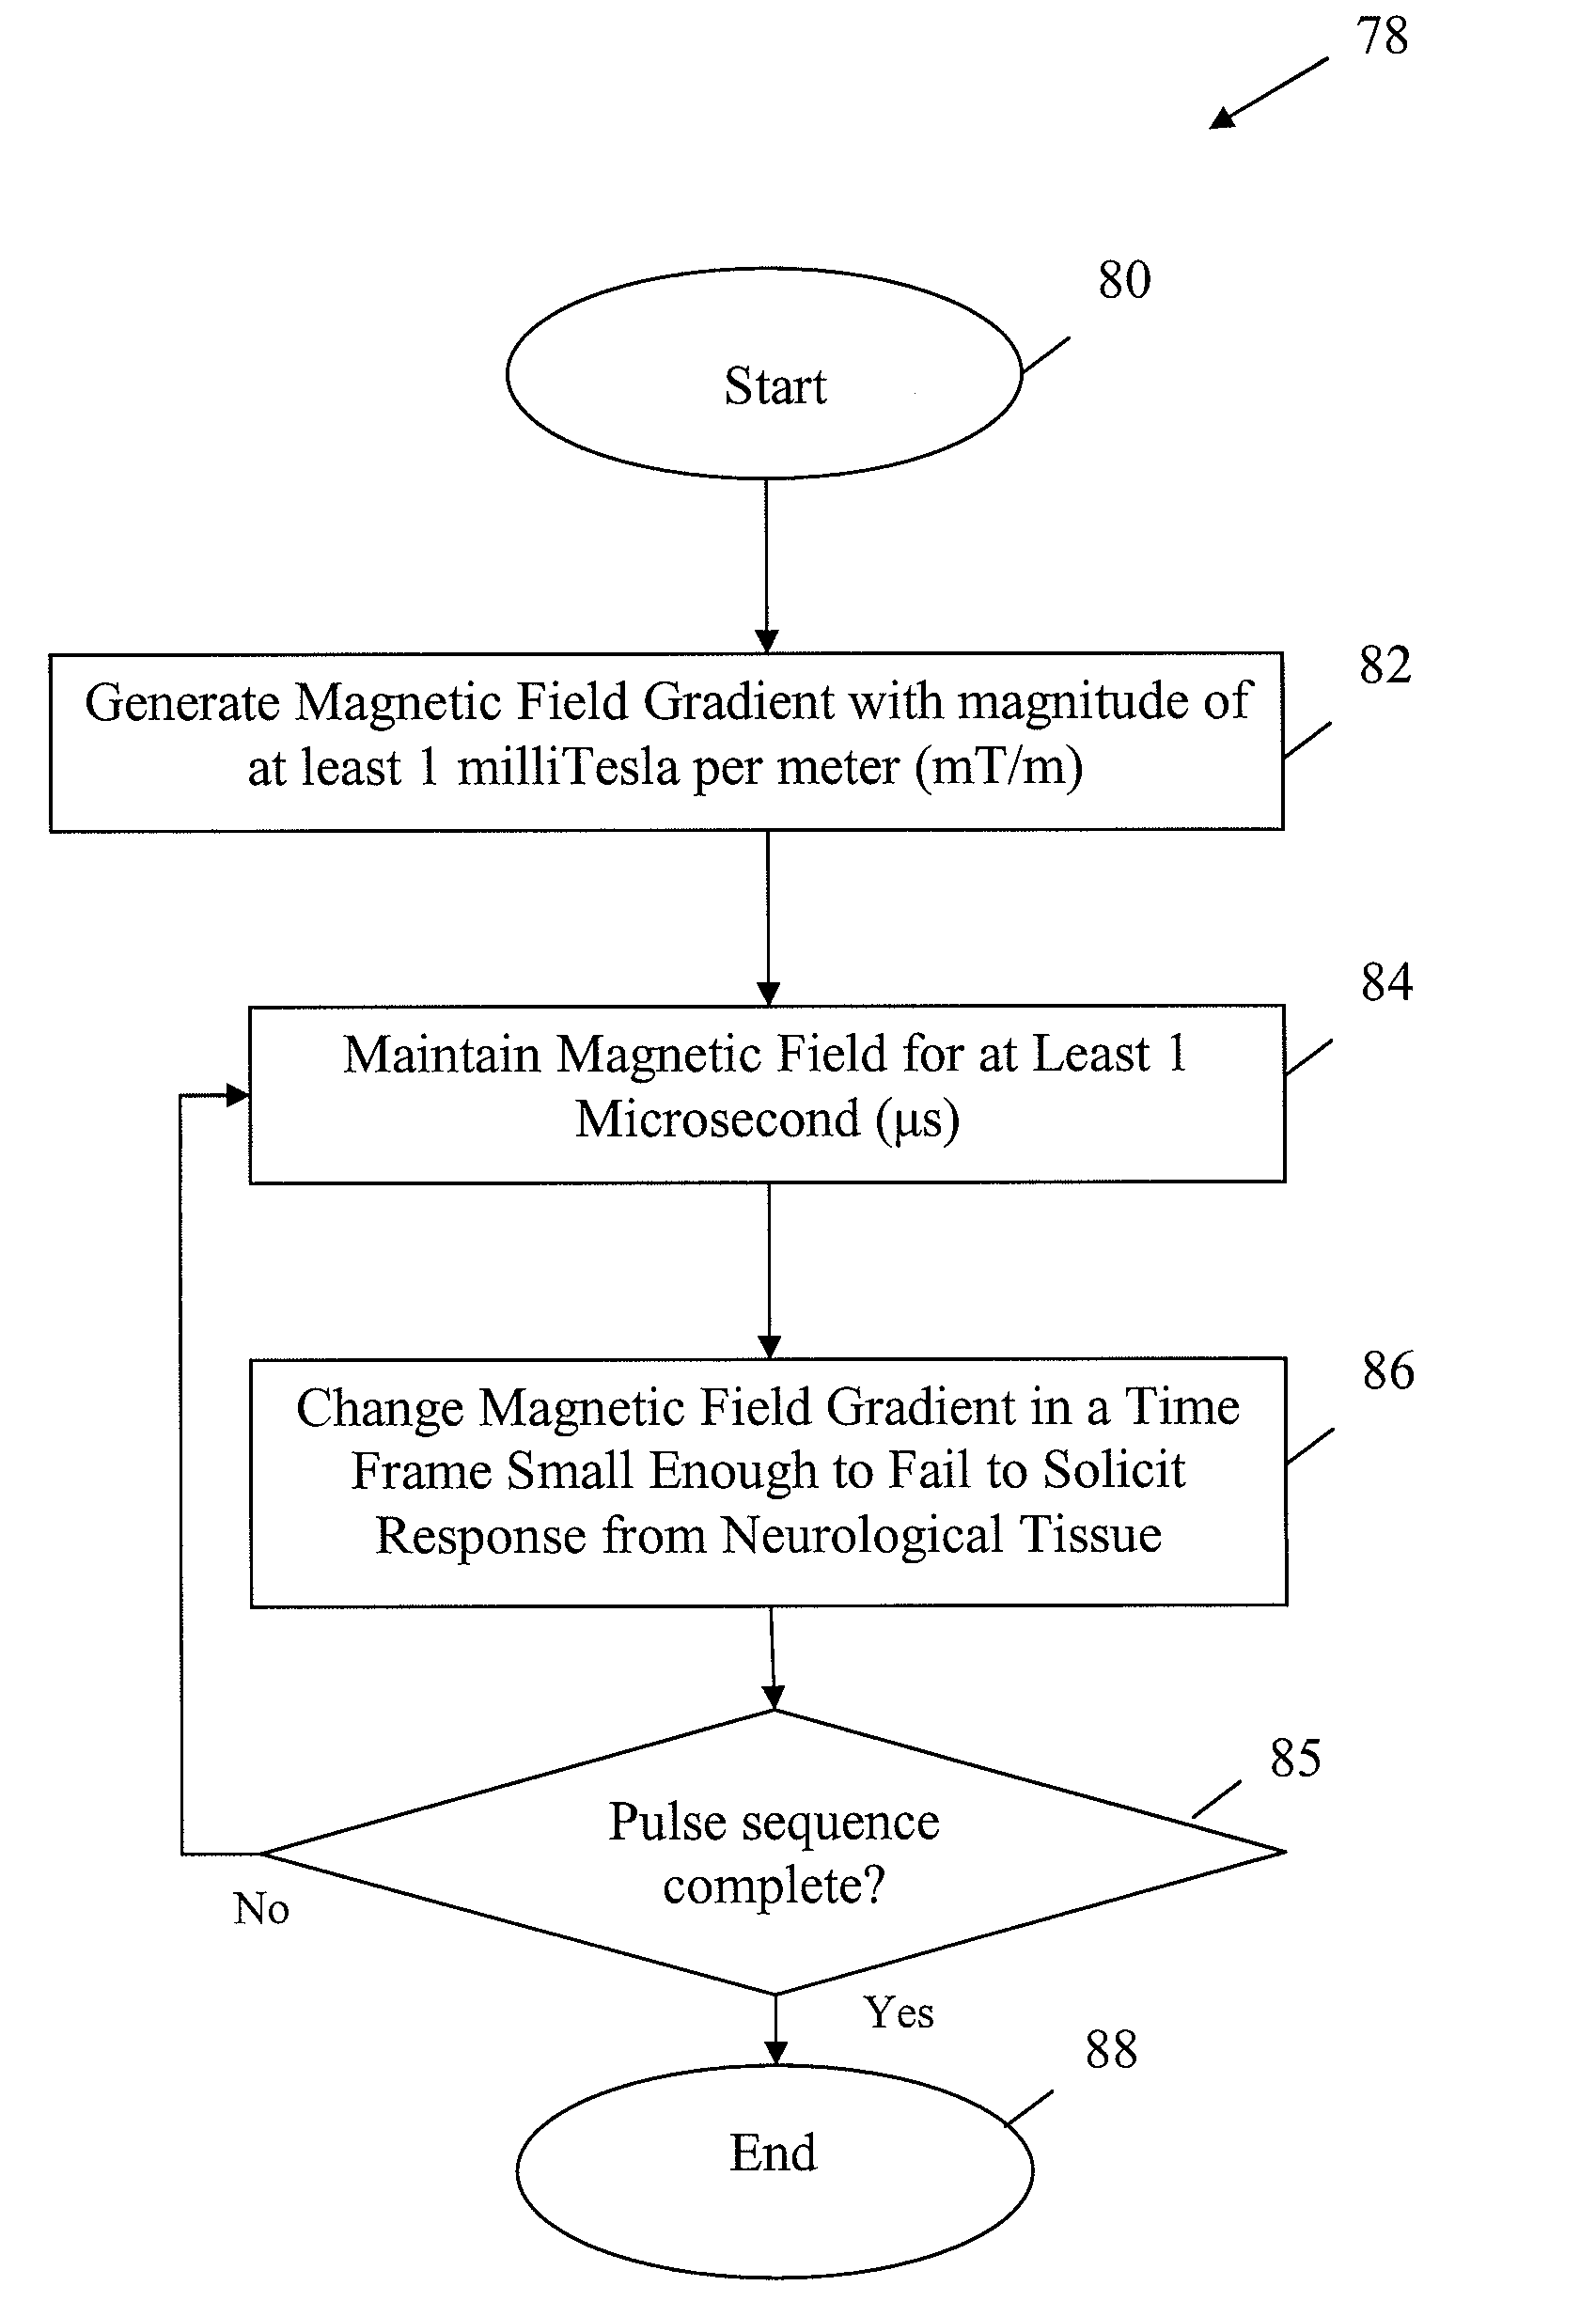 Apparatus and method for decreasing bio-effects of magnetic fields